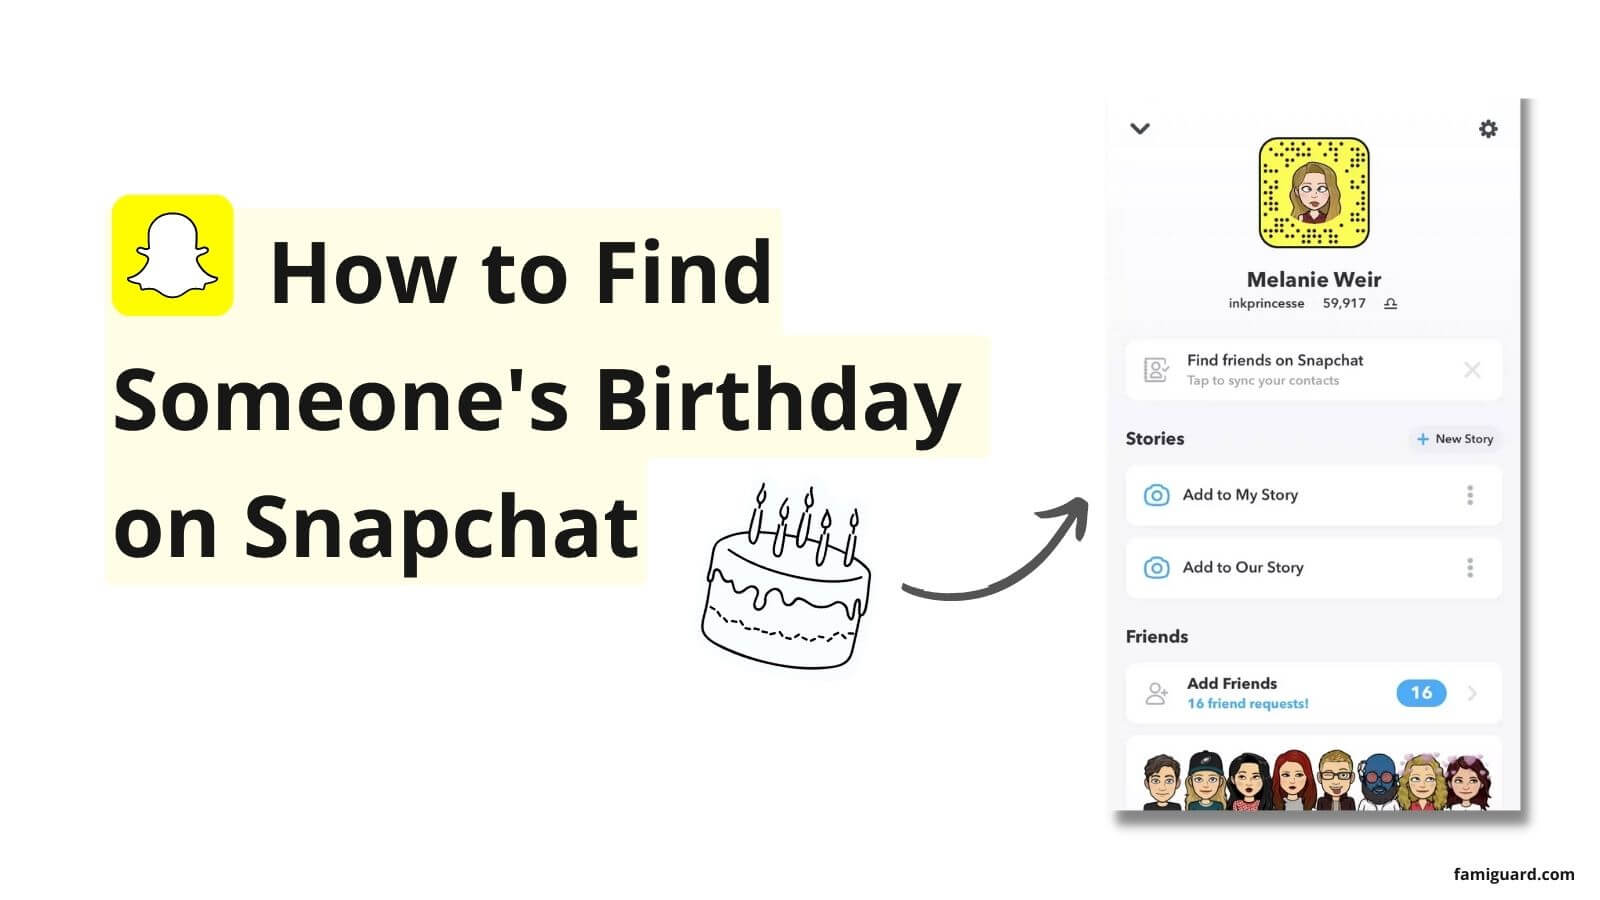 Step-by-step] How to Find Someone's Birthday on Snapchat